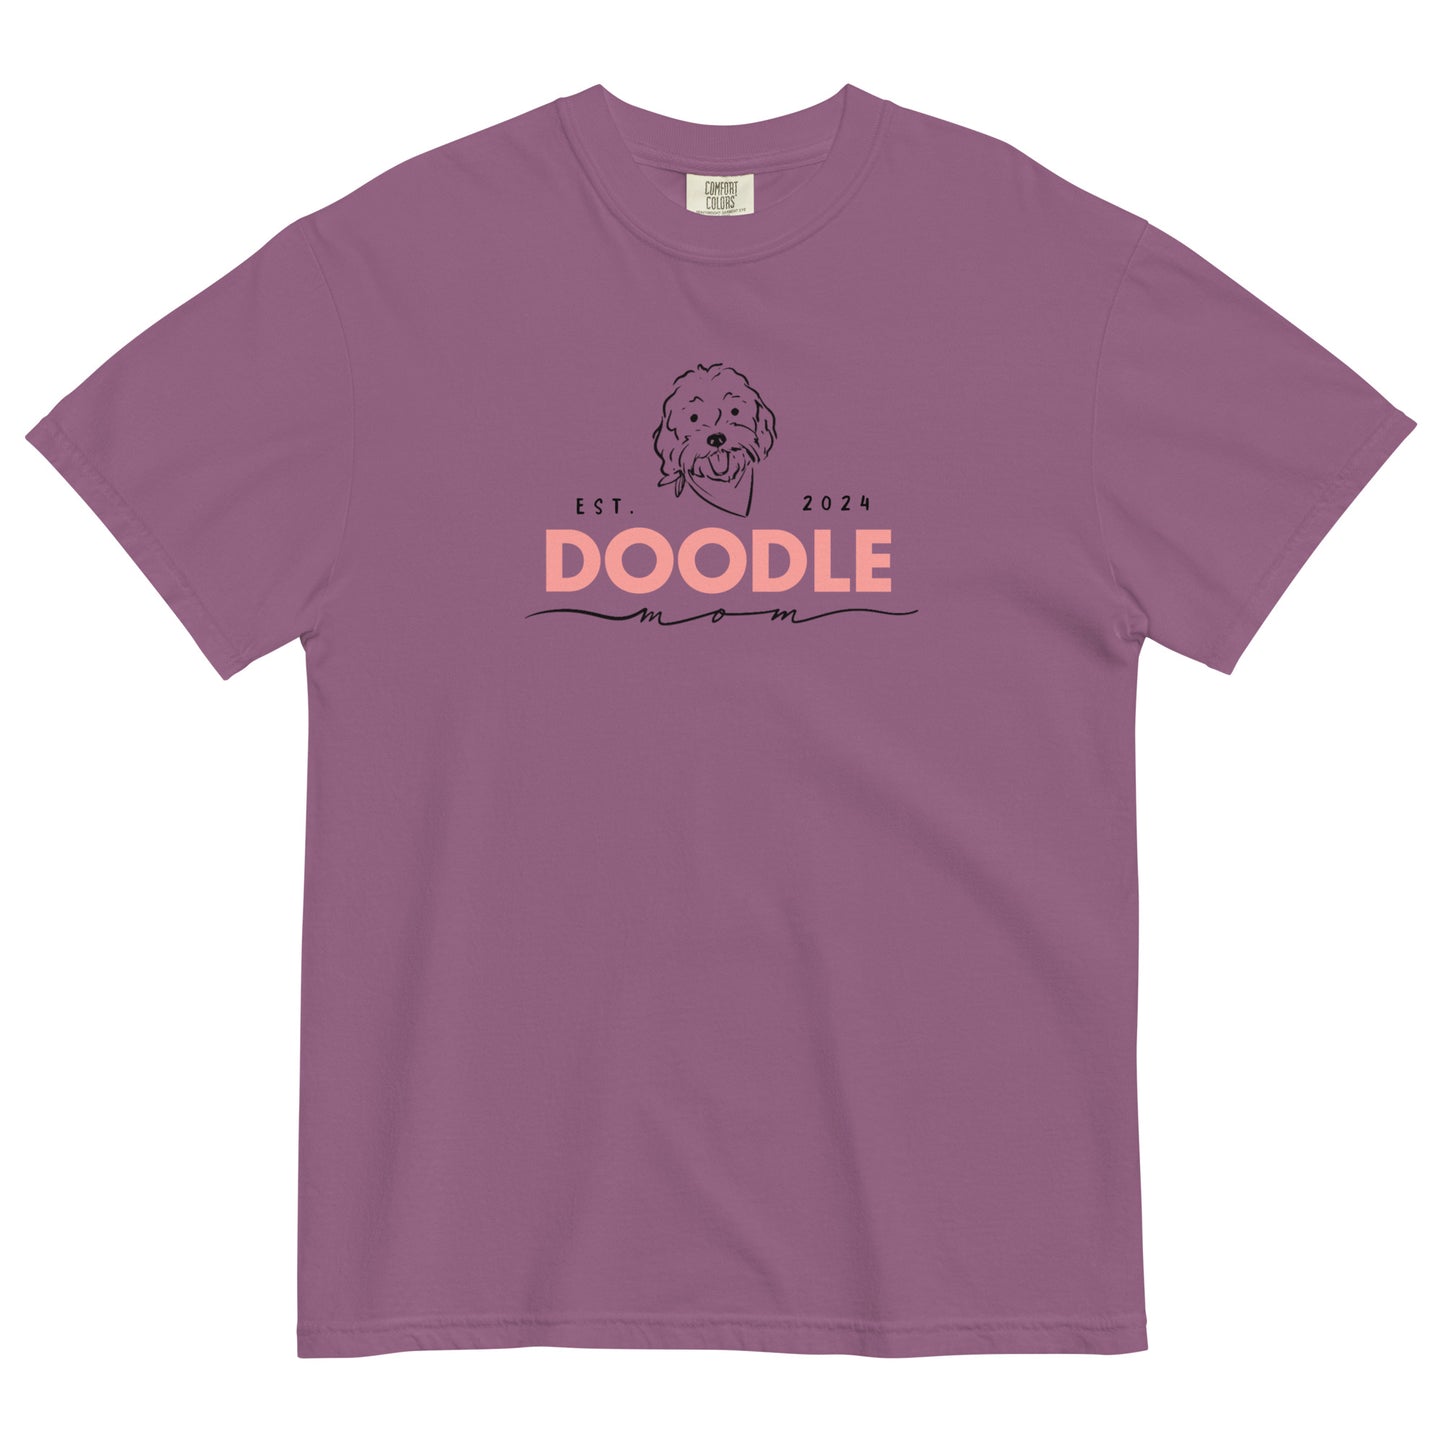 This Doodle T-shirt is berry colored and  features the message, "Doodle Mom Est. 2024" with a cute Doodle dog's face printed on the front of a cozy T-Shirt. The tag inside the shirt says Comfort Colors